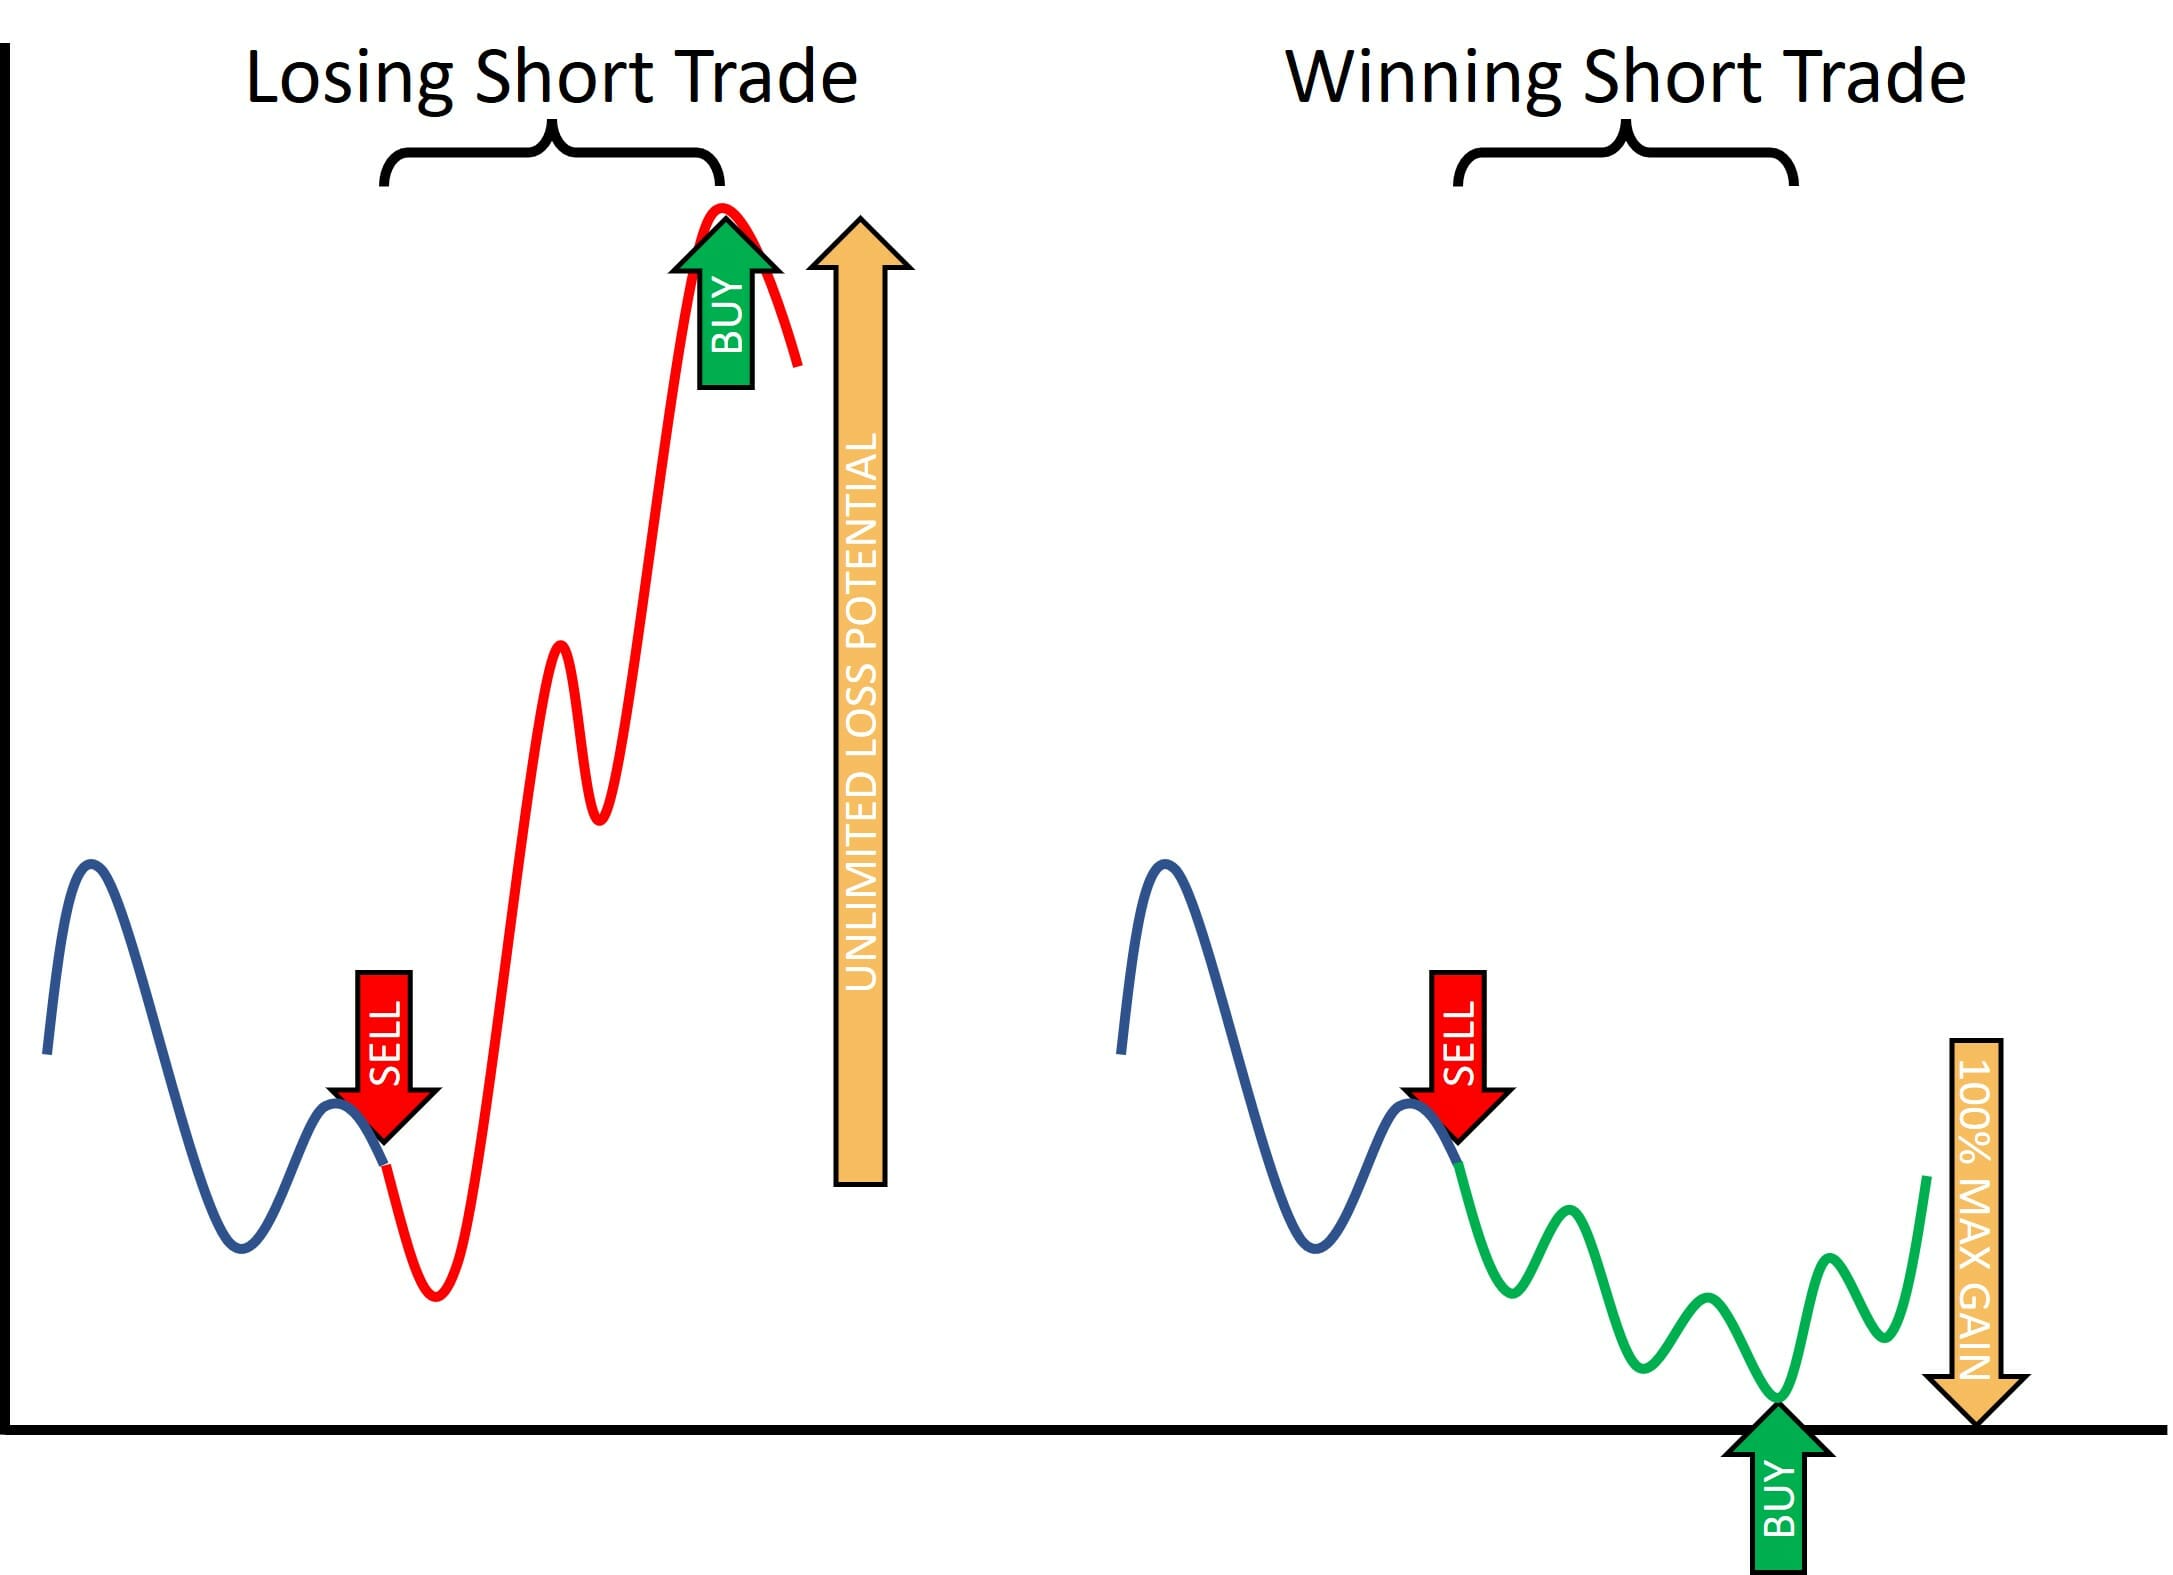 Short selling of stocks - unlimited loss potential - limited gain potential